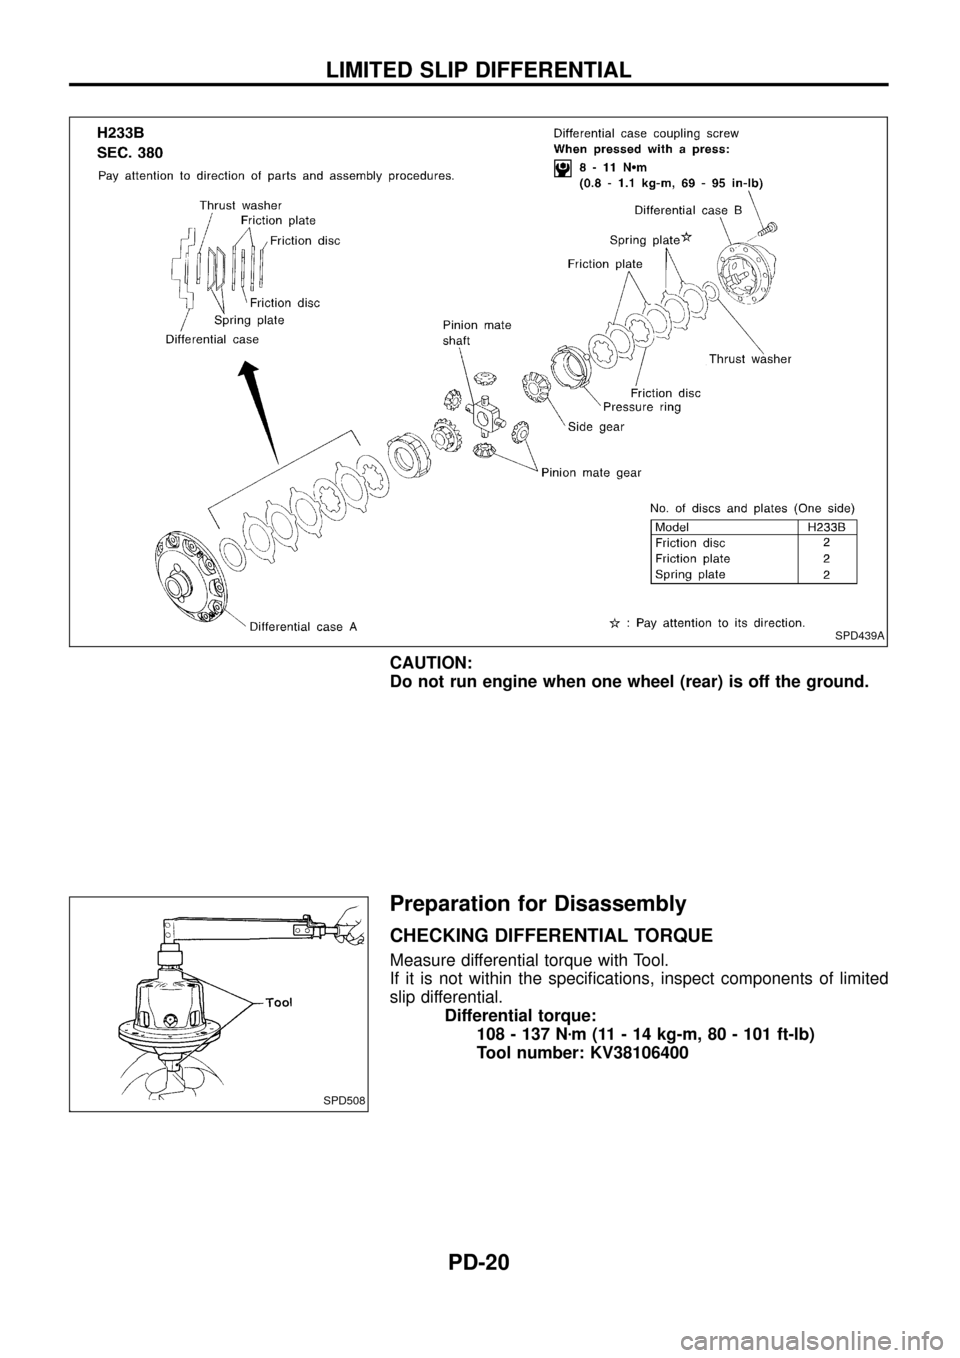 NISSAN PATROL 1998 Y61 / 5.G Propeller Shaft And Differential Carrier Workshop Manual CAUTION:
Do not run engine when one wheel (rear) is off the ground.
Preparation for Disassembly
CHECKING DIFFERENTIAL TORQUE
Measure differential torque with Tool.
If it is not within the speci®catio